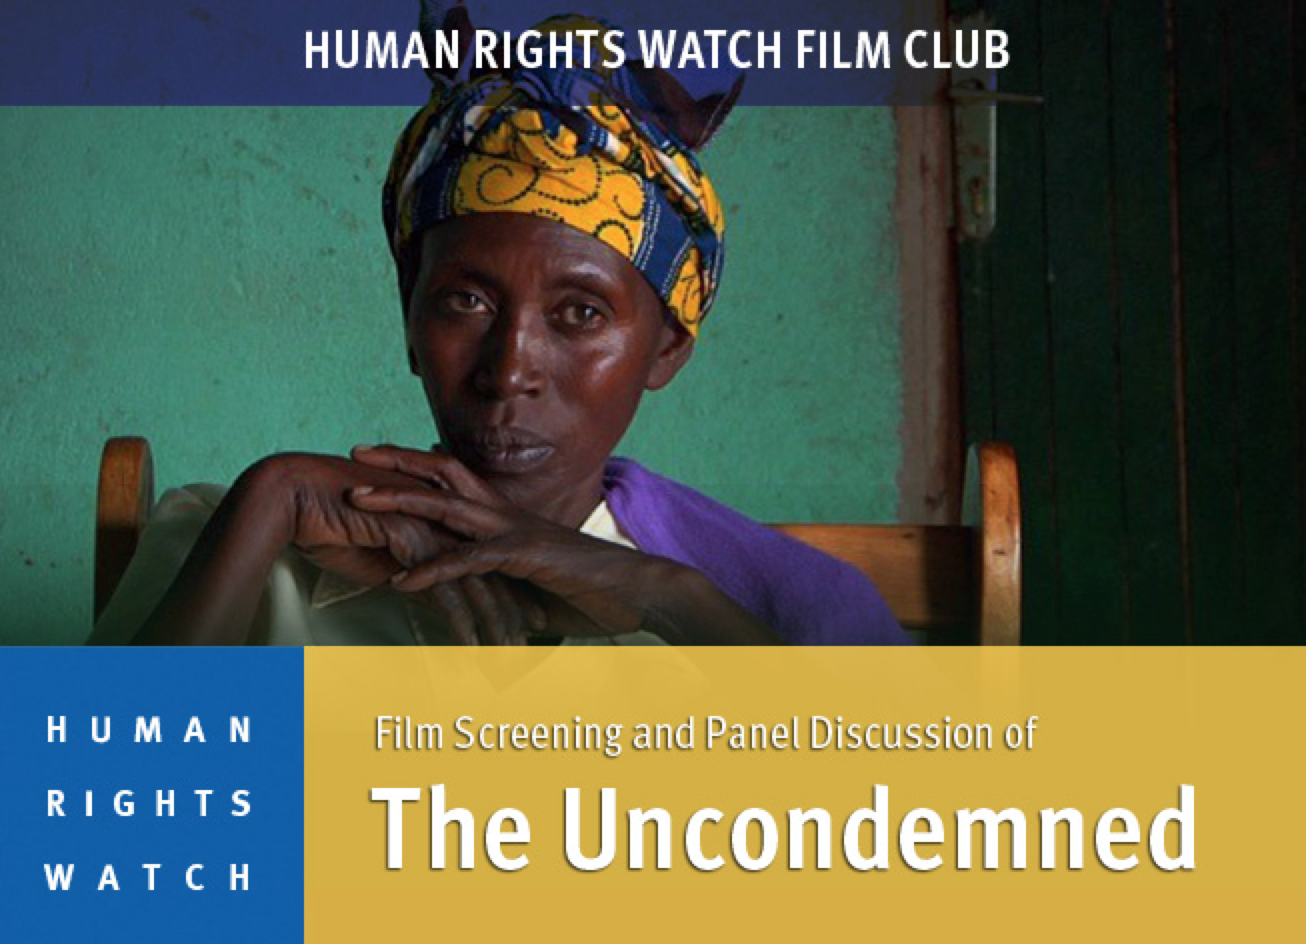 Human Rights Watch Film & Reception: The Uncondemned